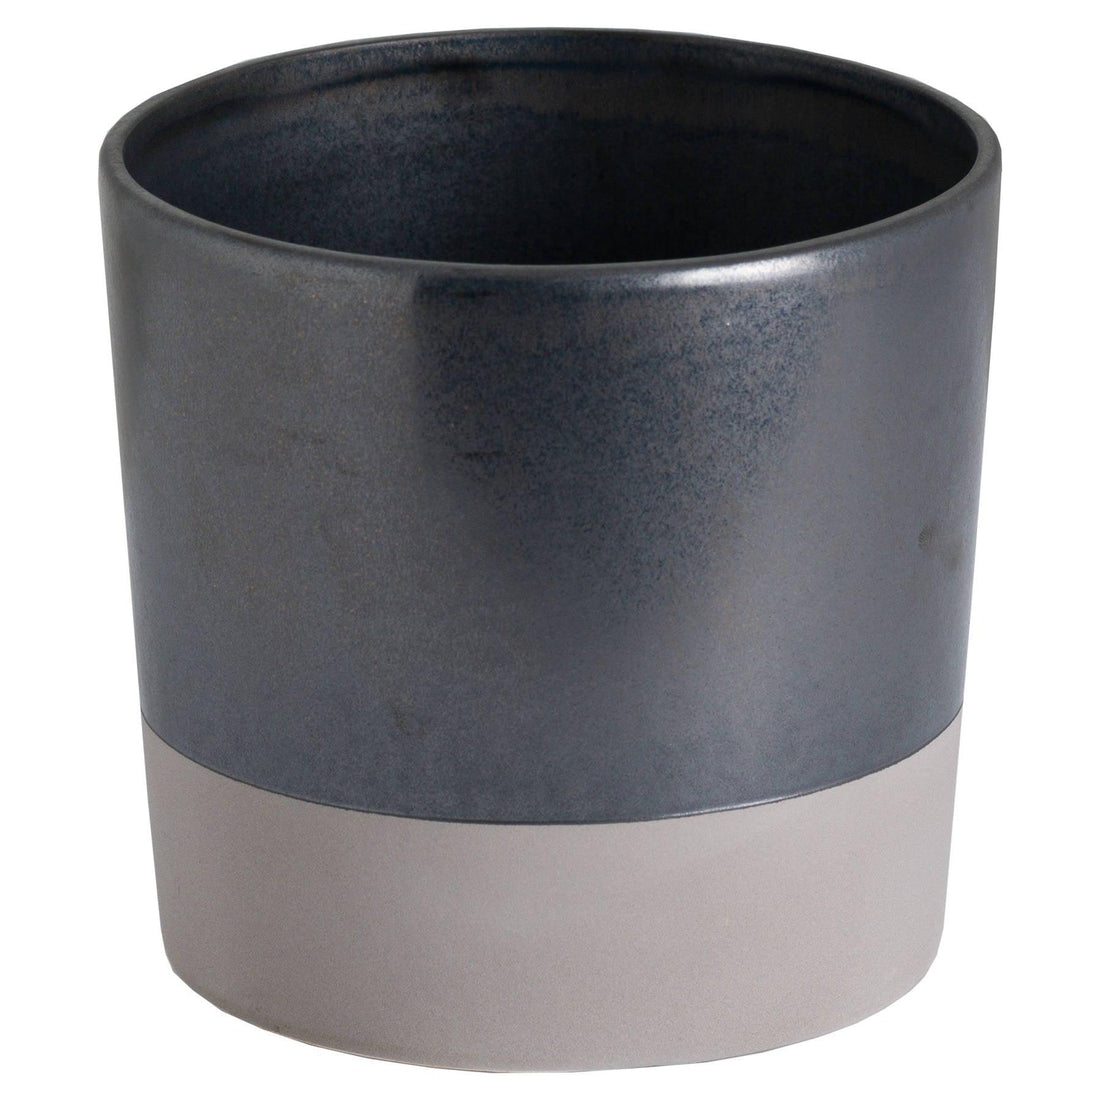 Large Metallic Grey Ceramic Planter - £34.95 - Gifts & Accessories > Kitchen And Tableware > Jugs & Bowls 